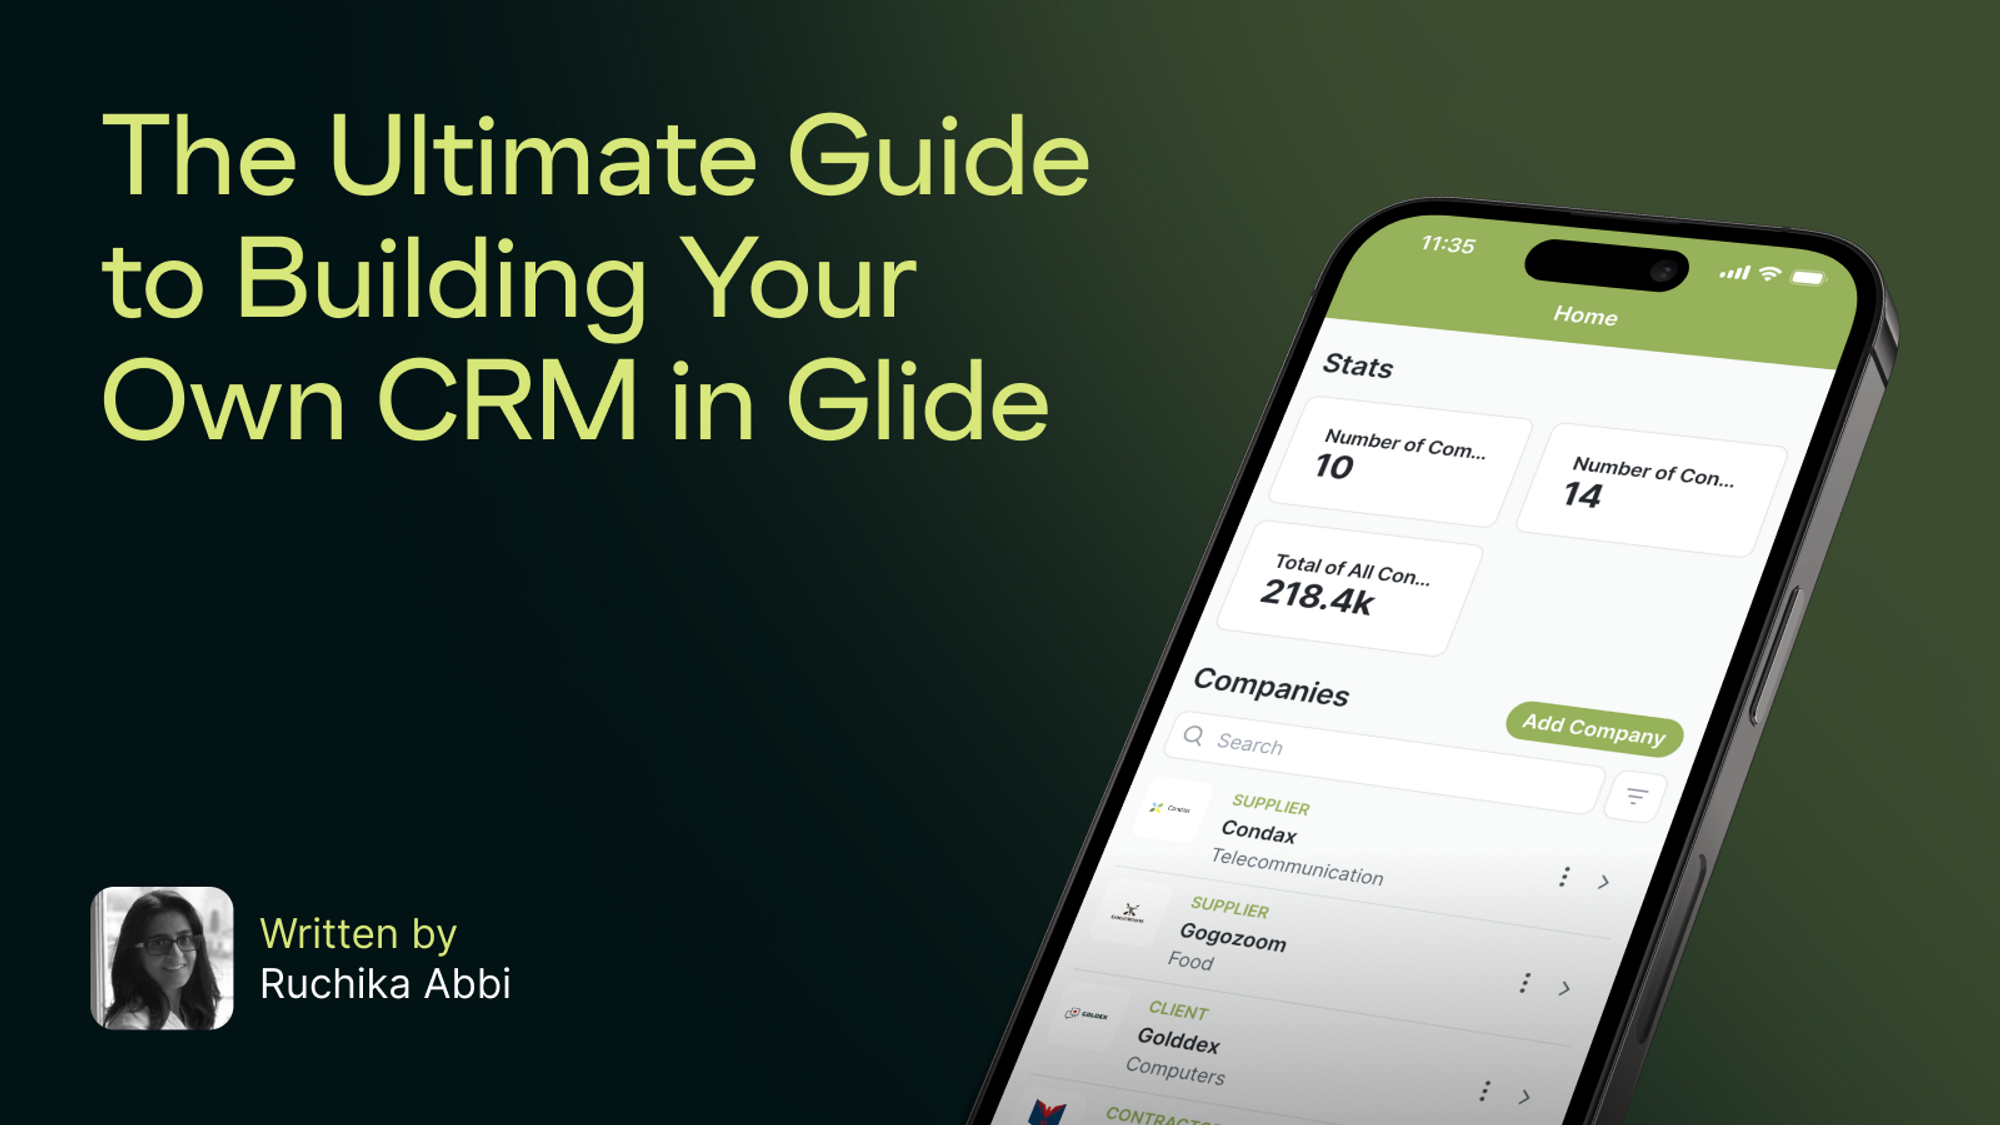 The Ultimate Guide to Building Your Own CRM in Glide